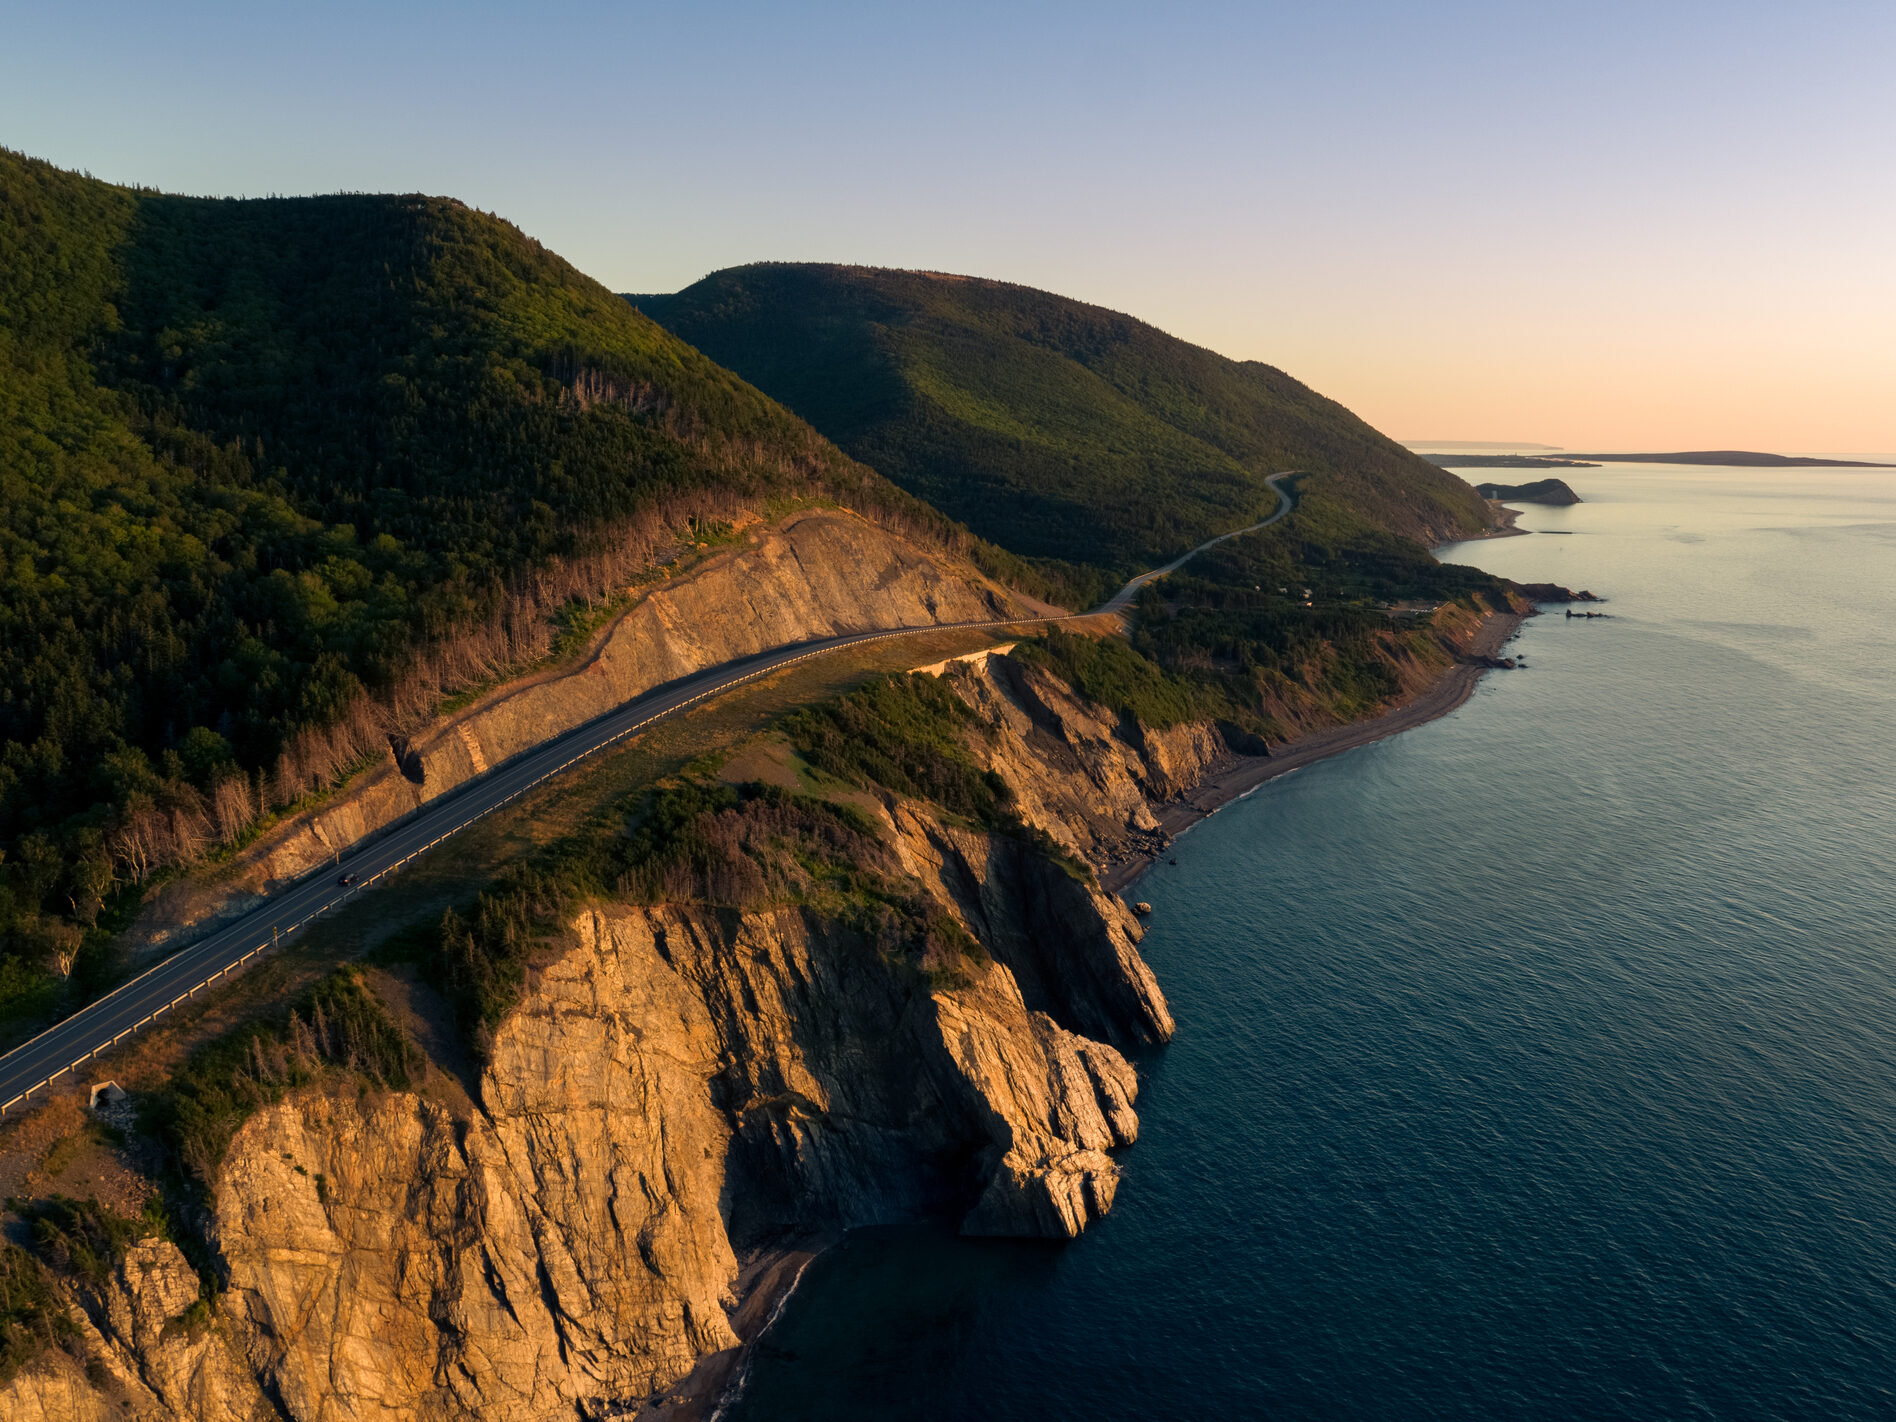 Cap Rouge section of the Cabot Trail with cliffs and ocean lit by the golden glow of a sunset